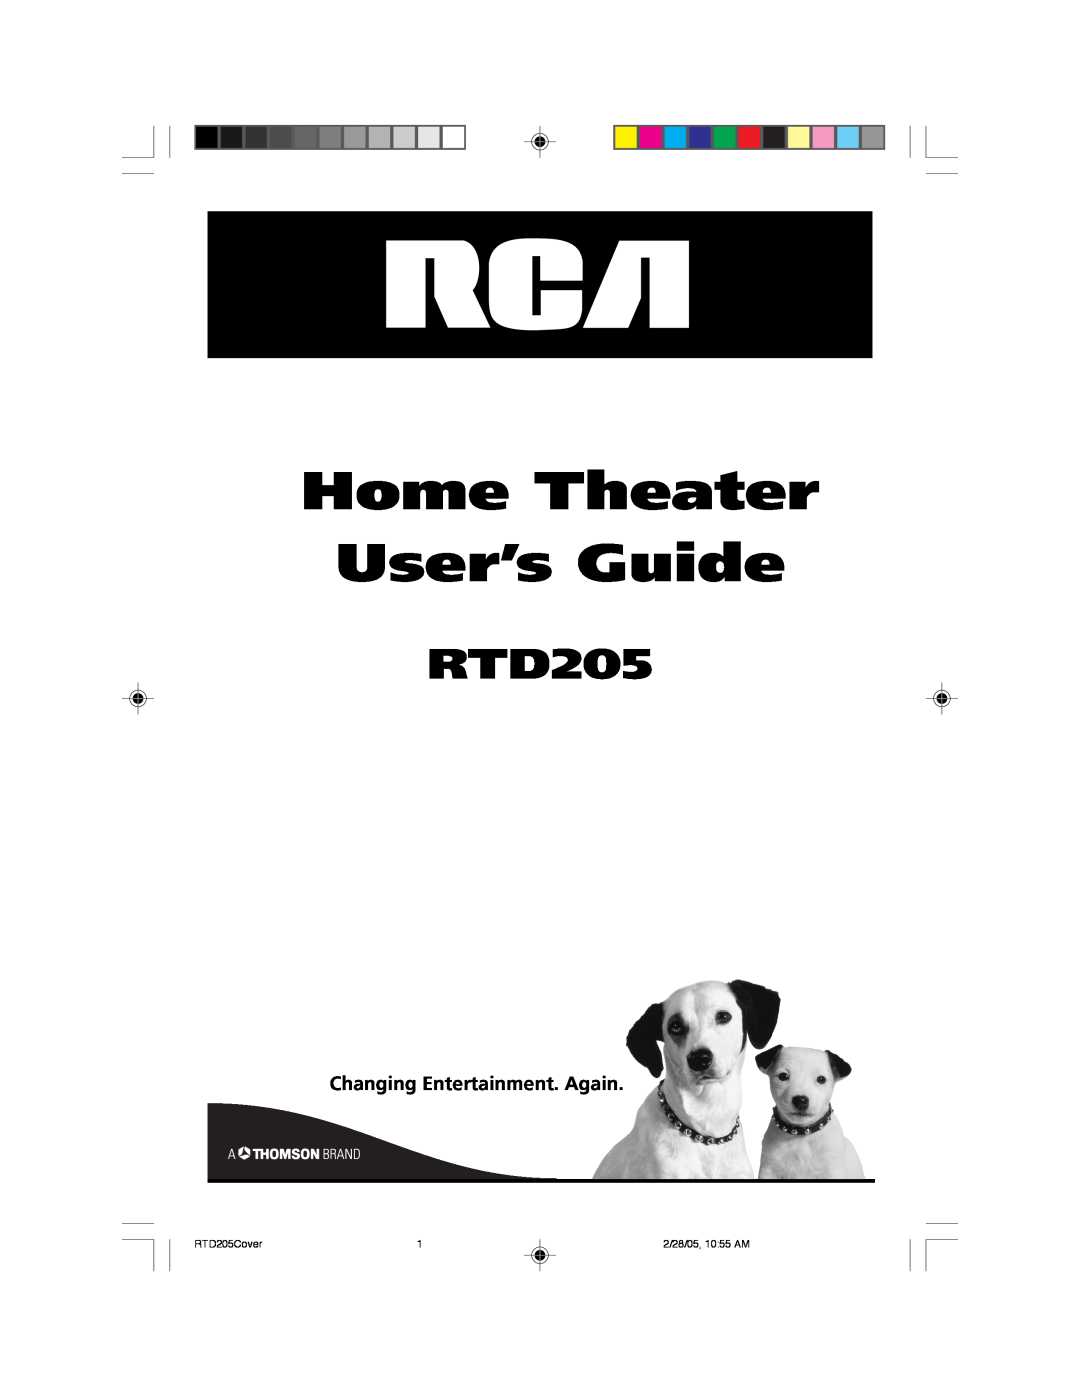 RCA manual Changing Entertainment. Again, Home Theater User’s Guide, RTD205Cover, 2/28/05, 1055 AM 